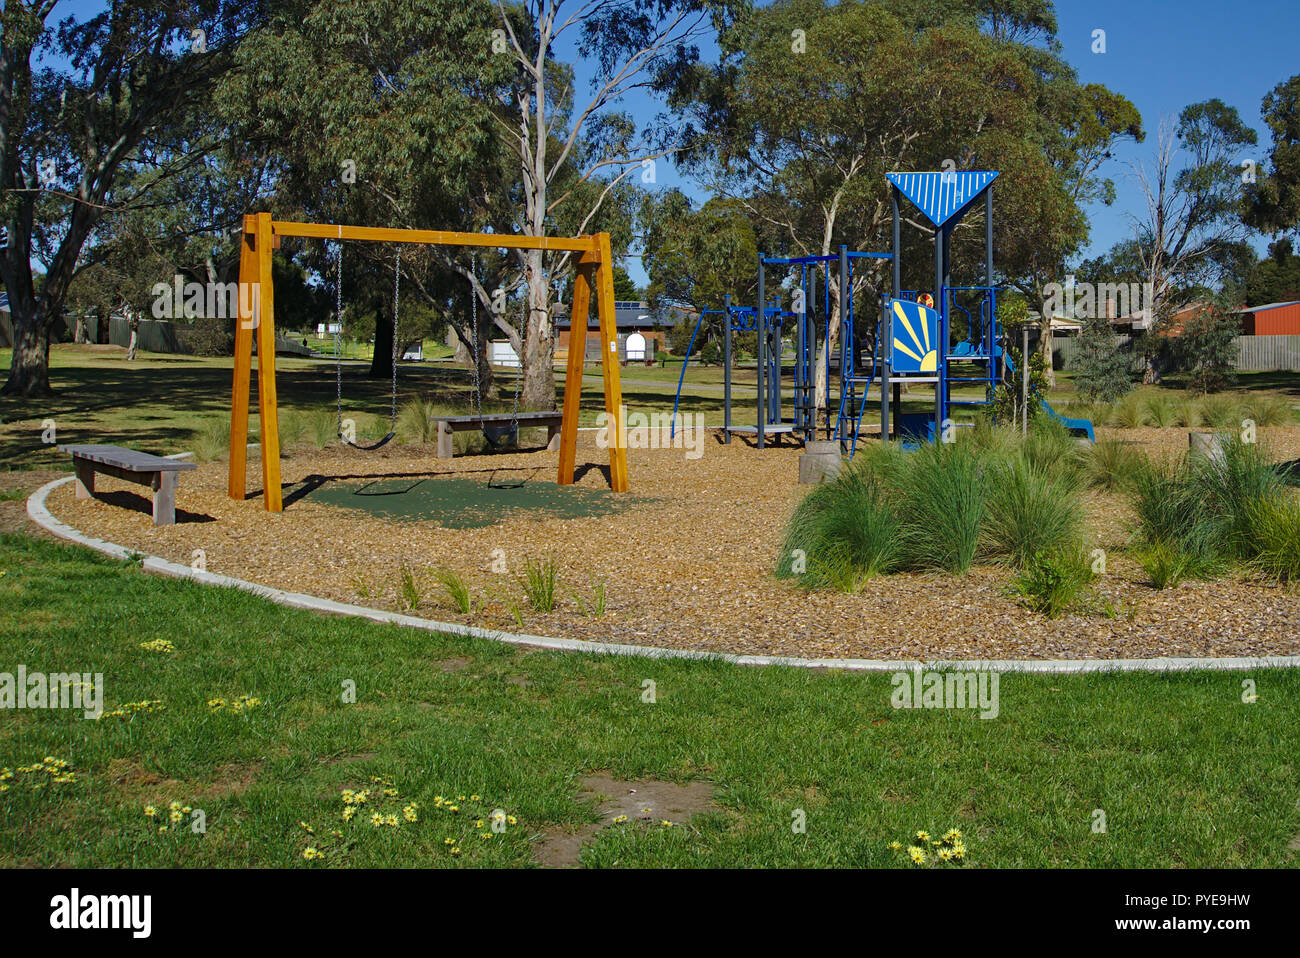 Empty playground at public park during daytime with lots of trees and blue sky Stock Photo